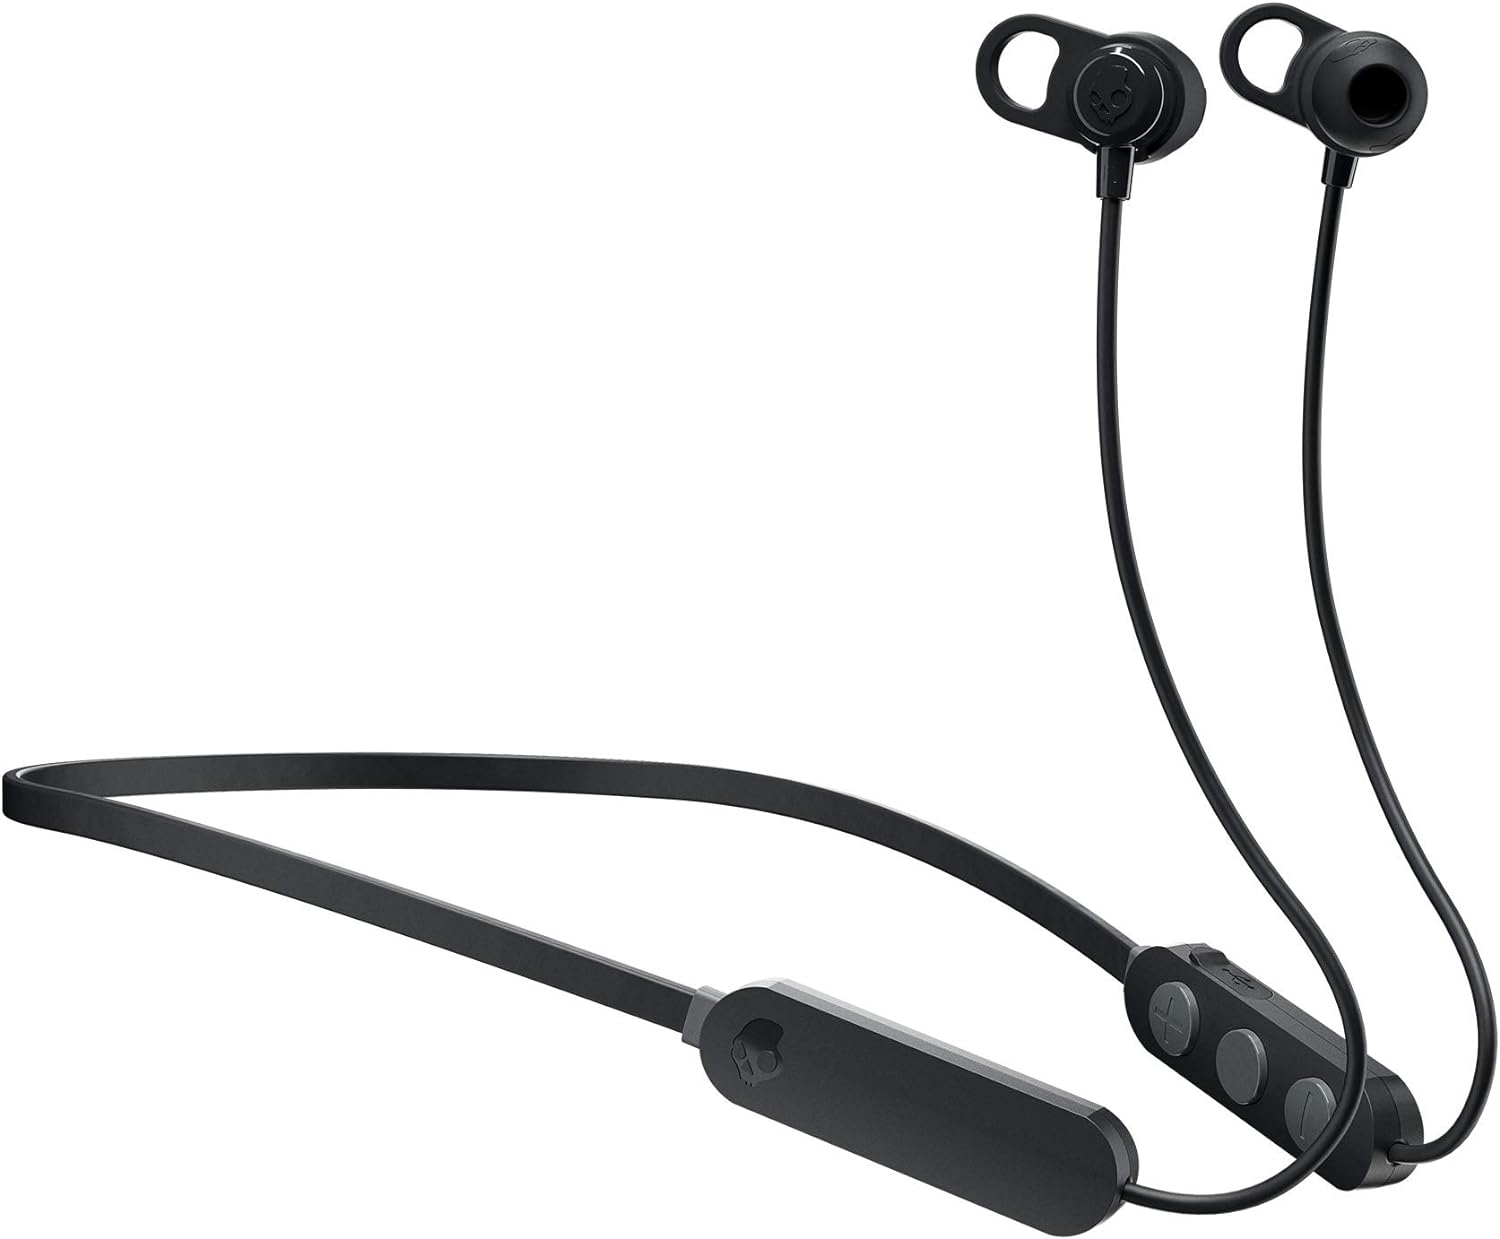 Skullcandy Jib+ In-Ear Wireless Earbuds, 6 Hr Battery, Microphone, Works with iPhone Android and Bluetooth Devices - Black